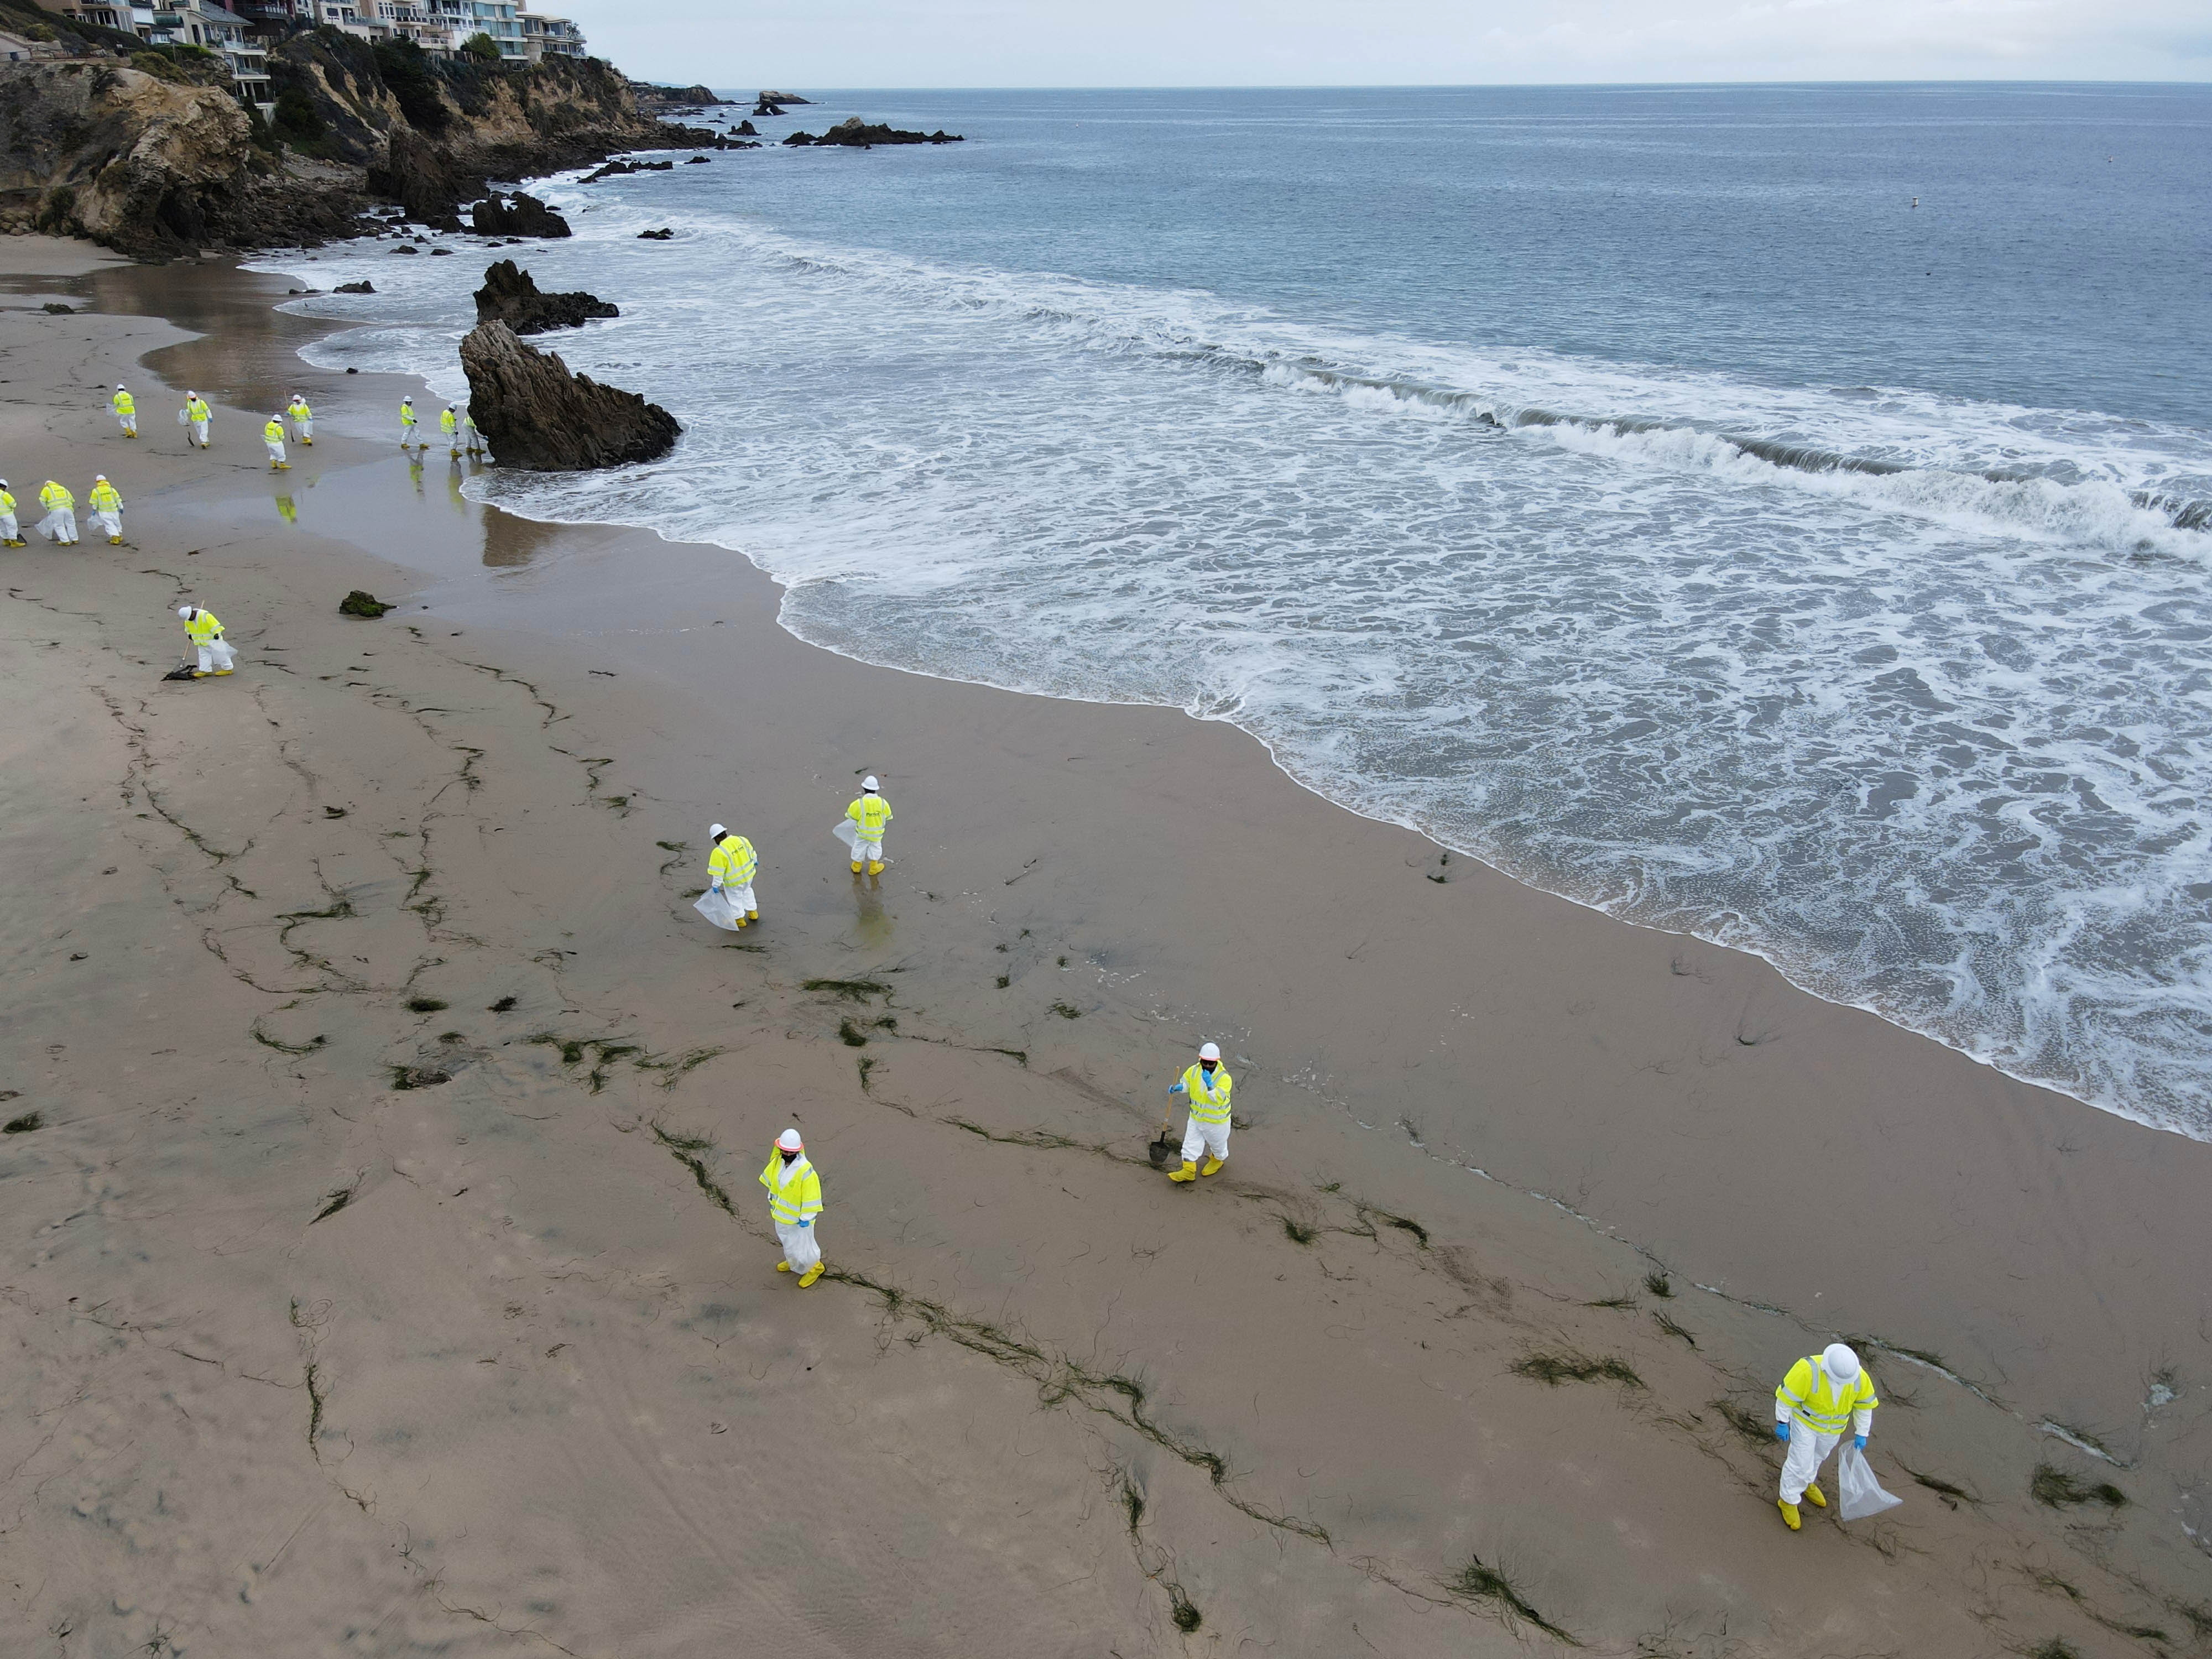 Workers rake up globs of crude oil after more than 3,000 barrels (126,000 gallons) of crude oil leaked from a ruptured pipeline into the Pacific Ocean in Corona Del Mar State Beach, Newport Beach, California, U.S. October 7, 2021. Picture taken with a drone. REUTERS/David Swanson